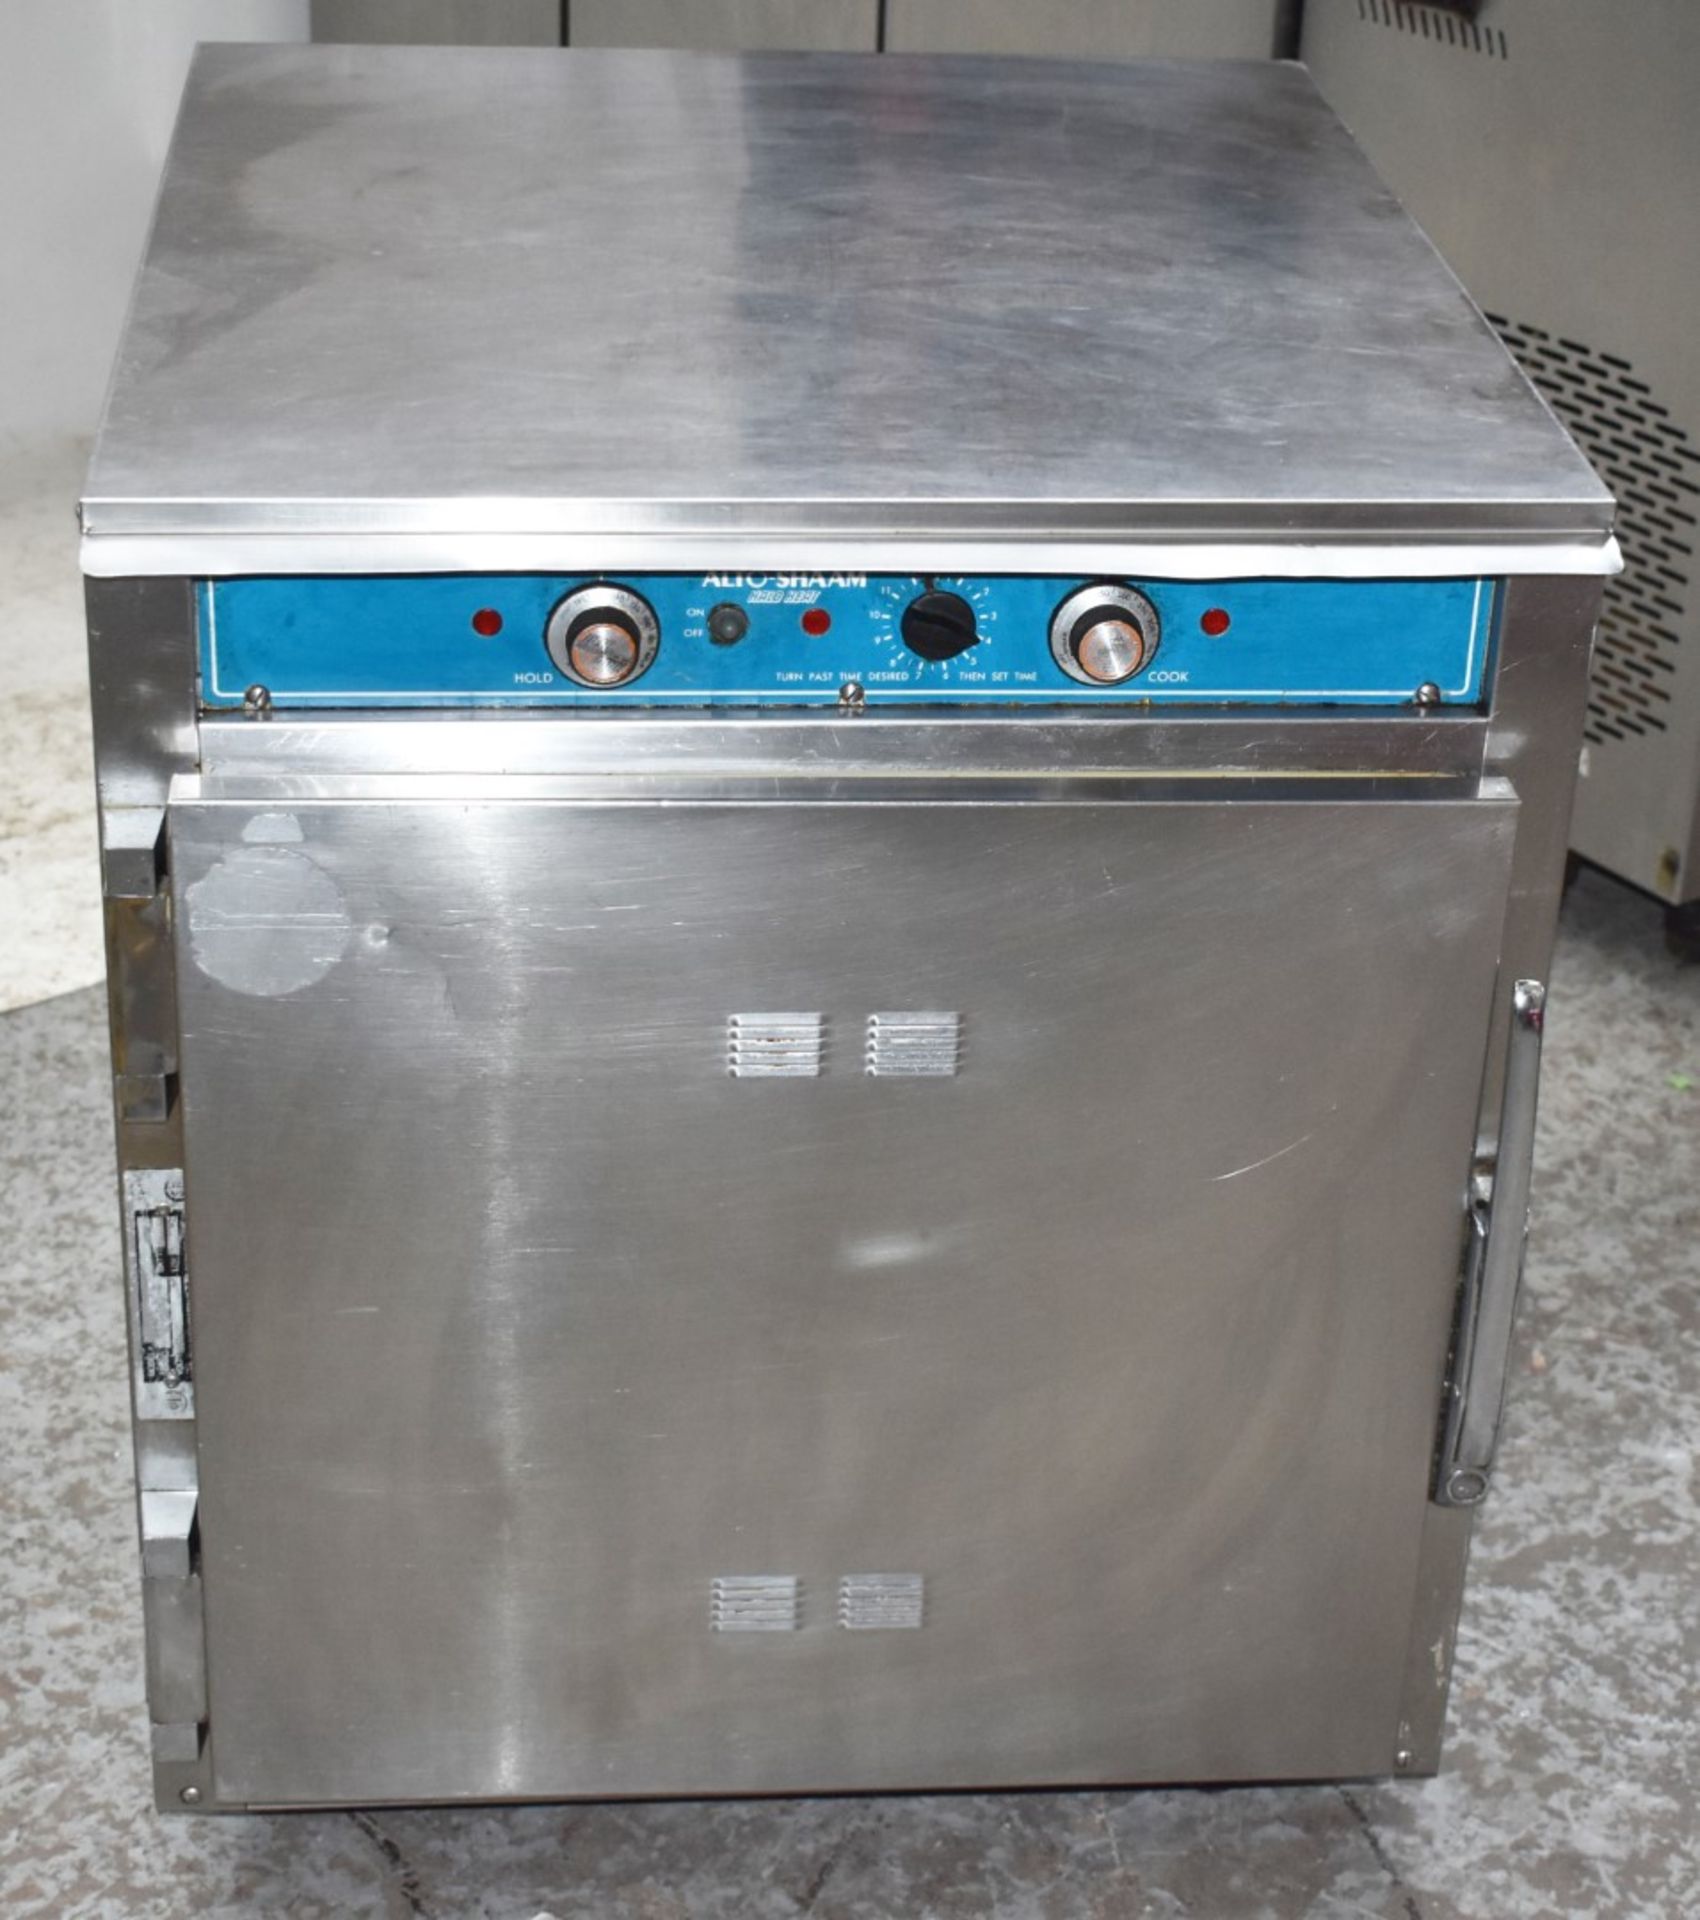 1 x Auto-Shaan Halo Heat Cook and Hold Food Cabinet - 240v - H76 x W65 x D75 cms - CL459 - - Image 2 of 7